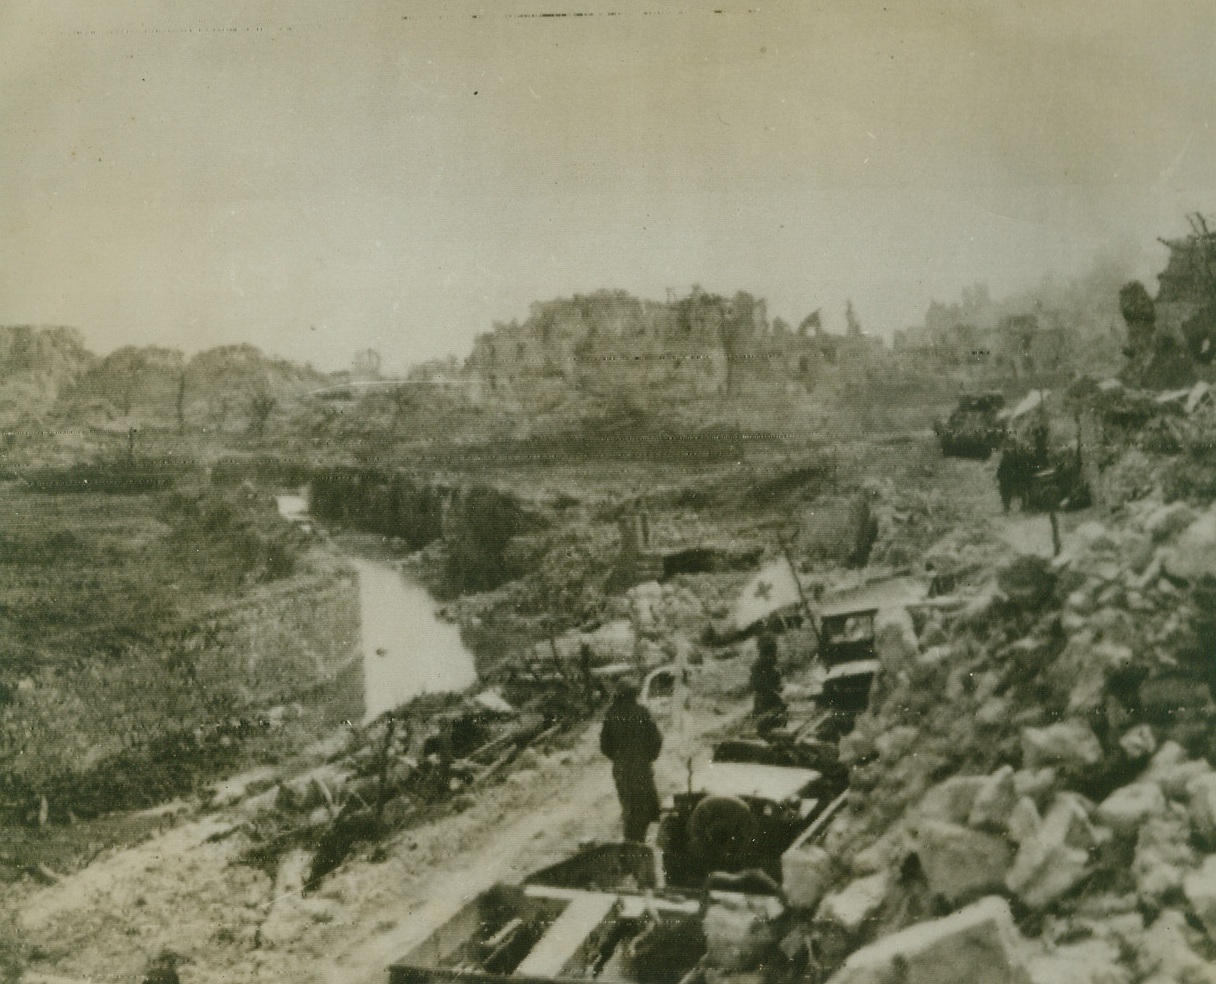 ENTERING “CITY OF THE DEAD, 3/20/1944. This photo, flashed to the U.S. by radio today, shows a long line of Red Cross and patrol vehicles, pausing behind the shelter of piles of rubble, just before entering Cassino, Italy, following the Allied “obliteration raid”—heaviest of the war—on the town. German paratroops, landed after the raid, put up stubborn resistance, but today, all but a section of the southern part of Cassino was in Allied hands. Note ruined buildings (background in photo) marking the terrific destruction wreaked by Allied bombs.Credit: U.S. Signal Corps radiophoto from Acme;